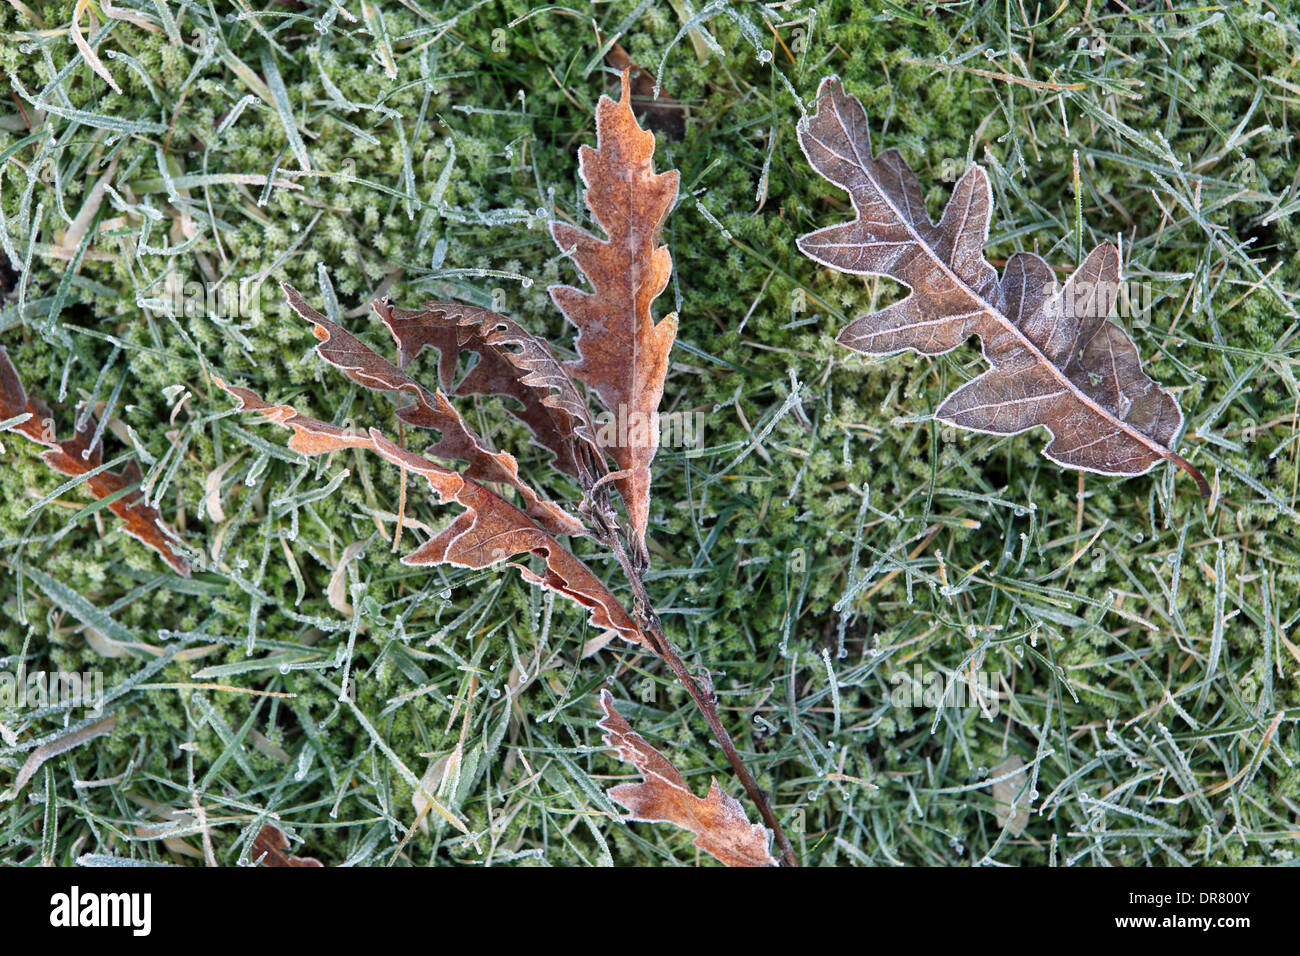 Frozen leaf, leaves, frost, frosty, cold autumn autumnal season. Stock Photo